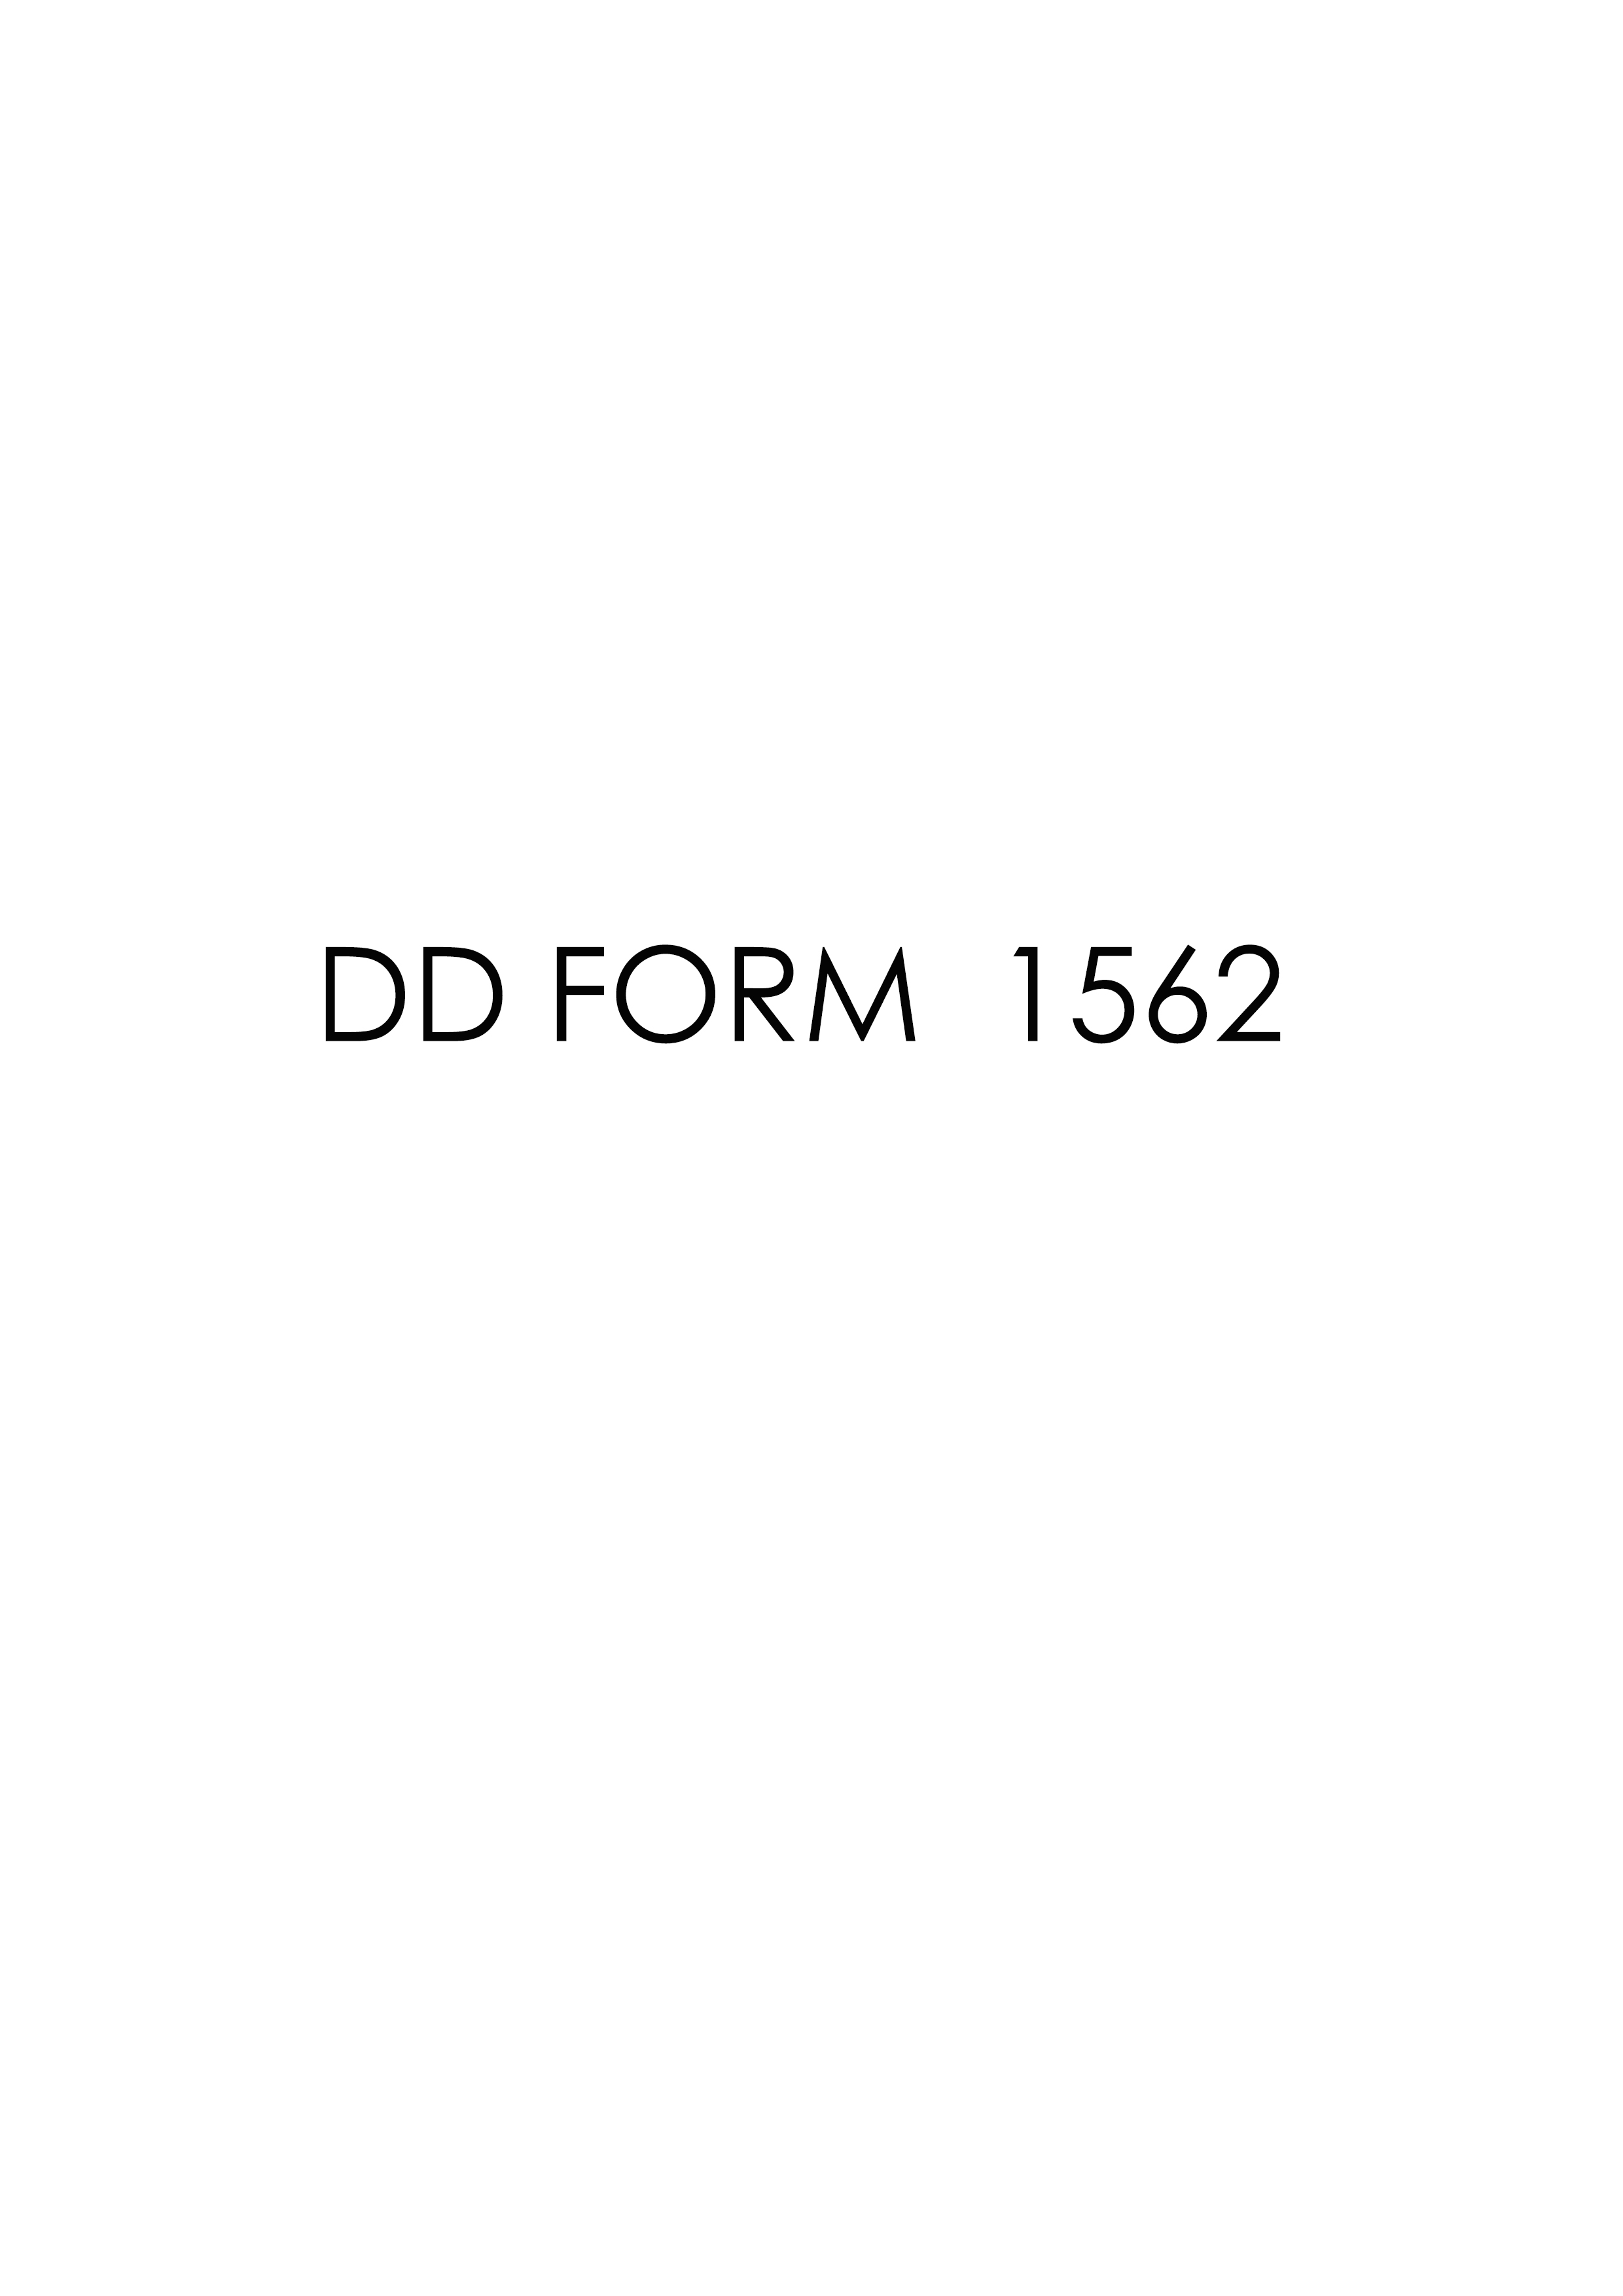 Download Fillable dd Form 1562